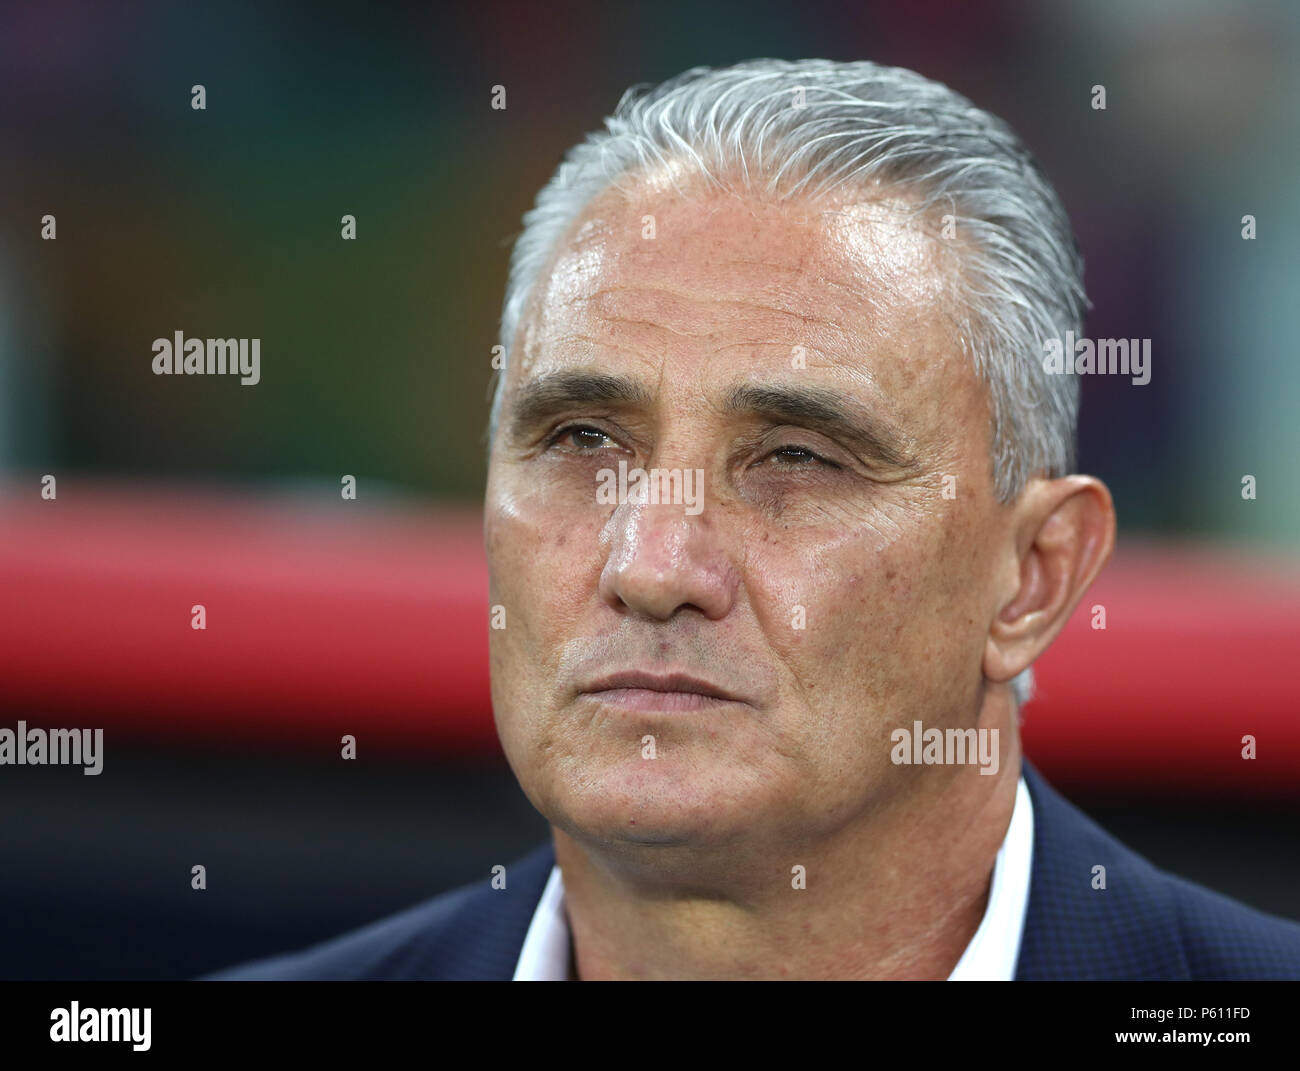 Moscow, Russia. 27th June, 2018. Head coach Tite of Brazil is seen prior to the 2018 FIFA World Cup Group E match between Brazil and Serbia in Moscow, Russia, June 27, 2018. Credit: Xu Zijian/Xinhua/Alamy Live News Stock Photo